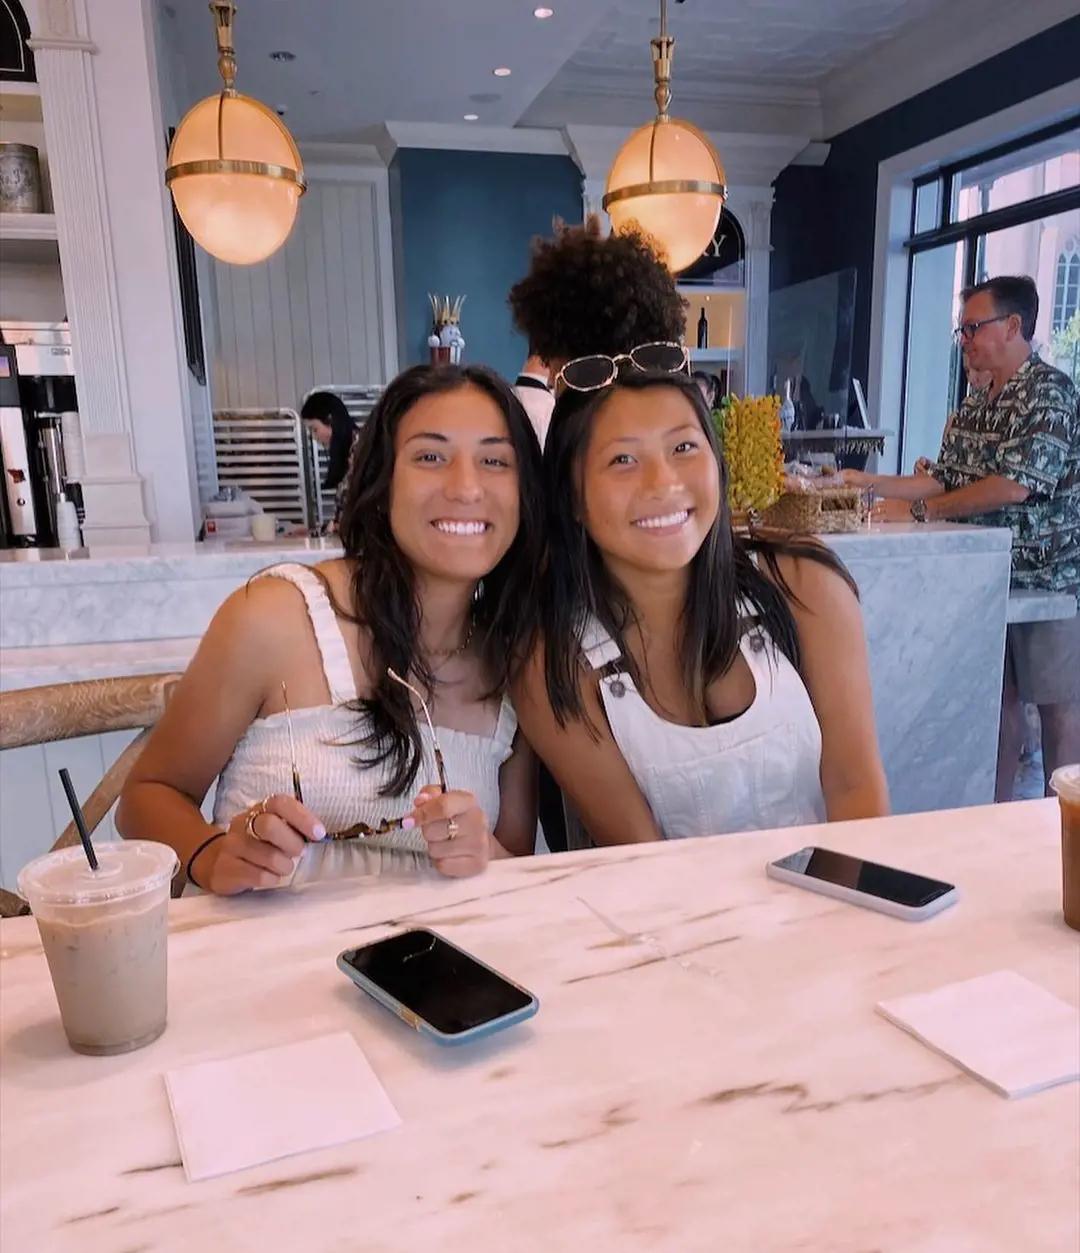 Olivia(left) with her friend Samantha at Charleston, South California on June 26, 2021. 